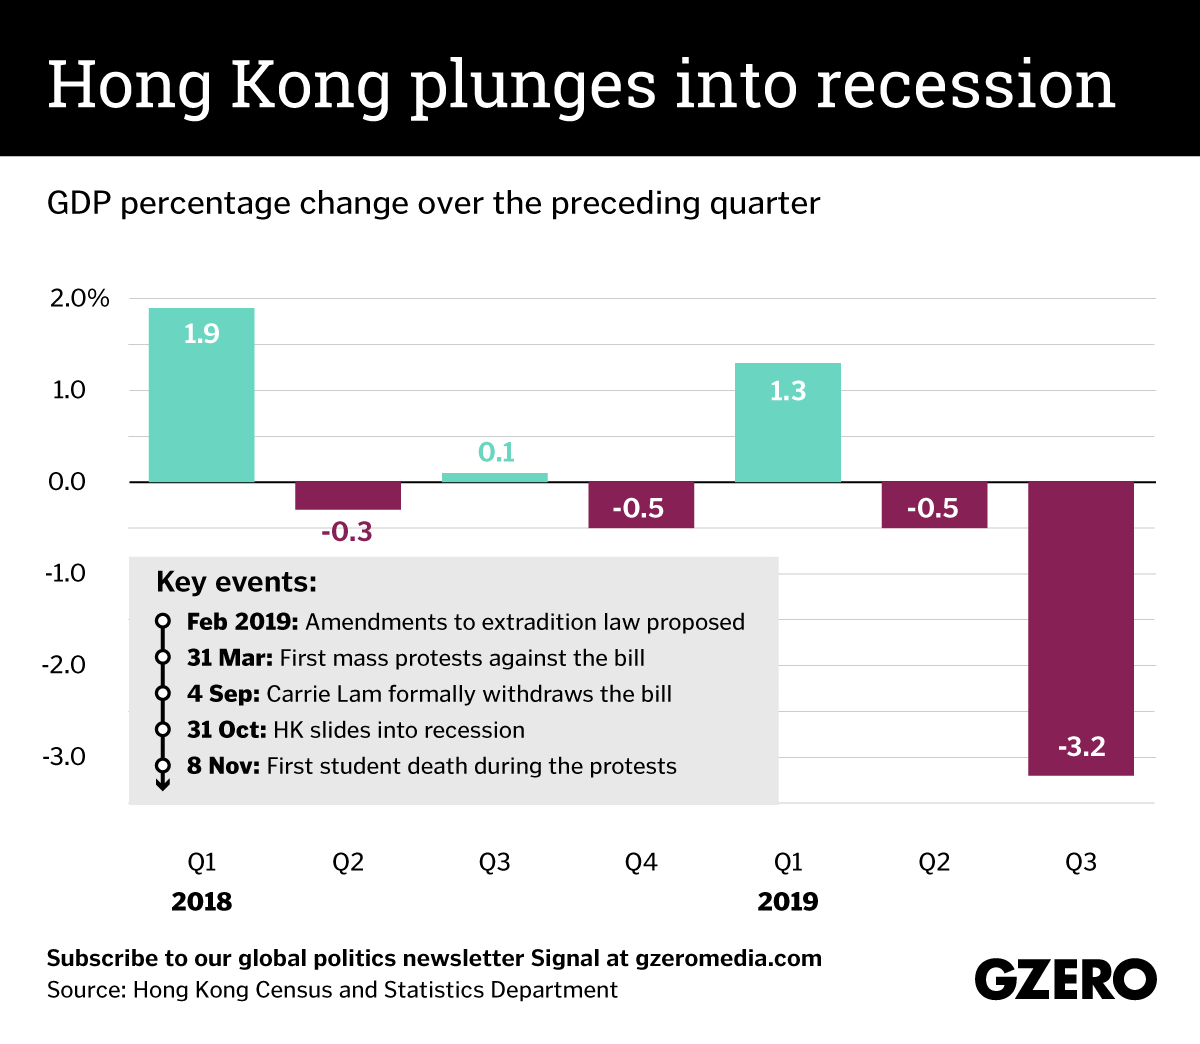 Graphic Truth: Hong Kong plunges into recession